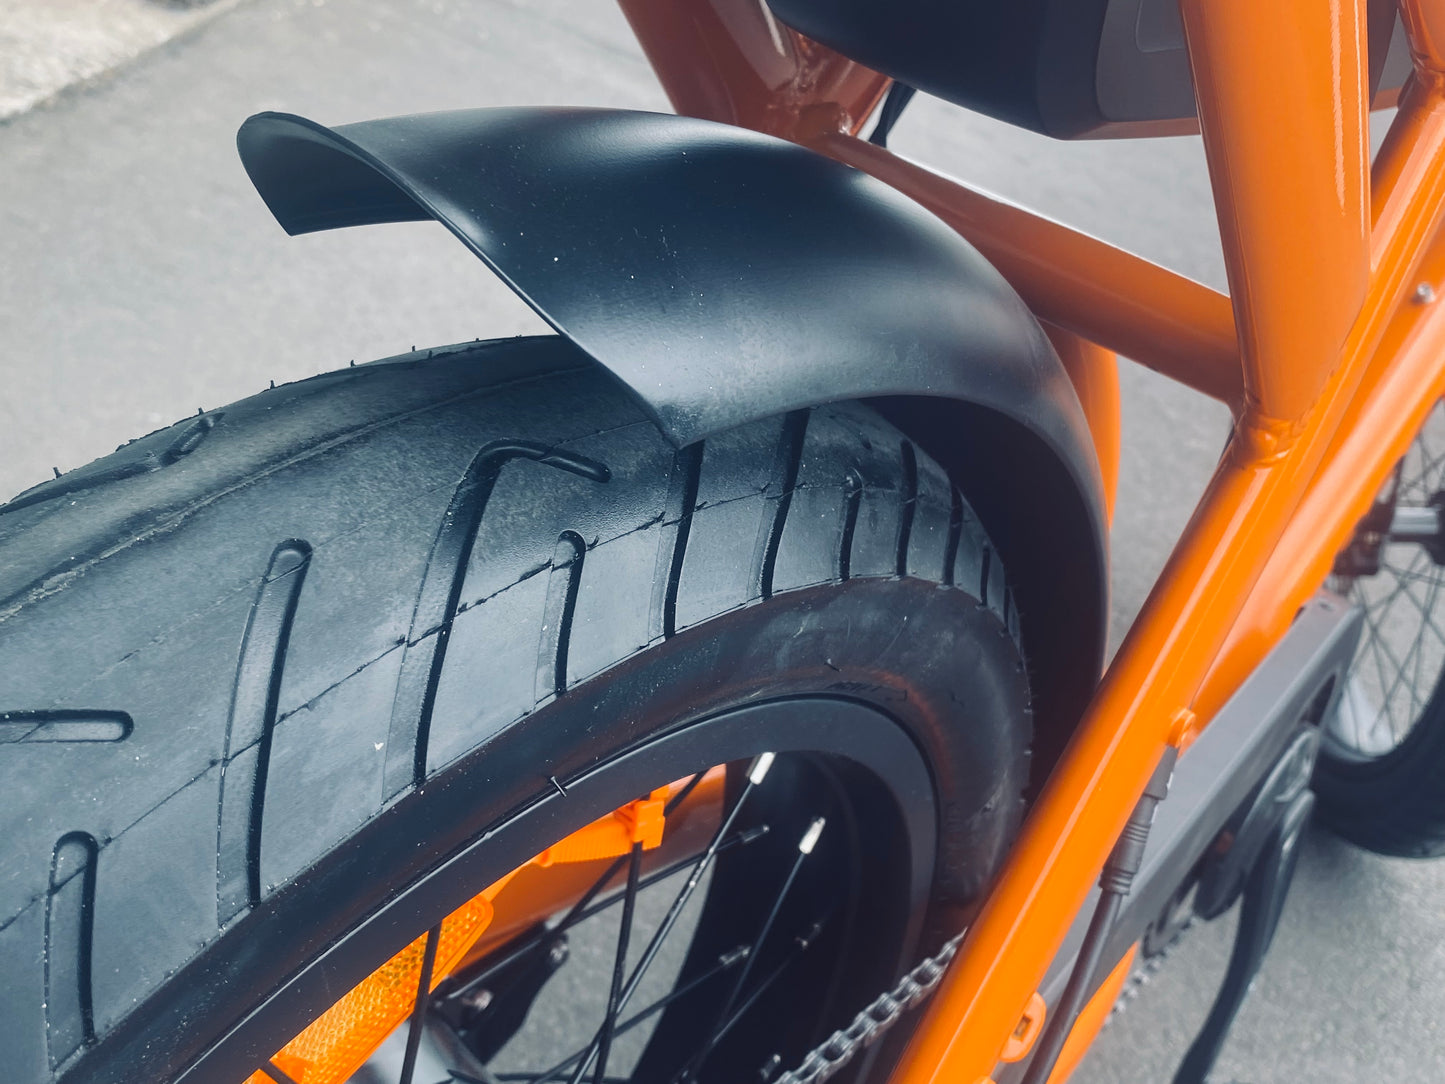 Apache Electric Bike, Modern yet retro 20" fat tyre ebike with performance and packed with features in true SUPER 73 style from Boostbikes. With super smooth kenda street tyres.